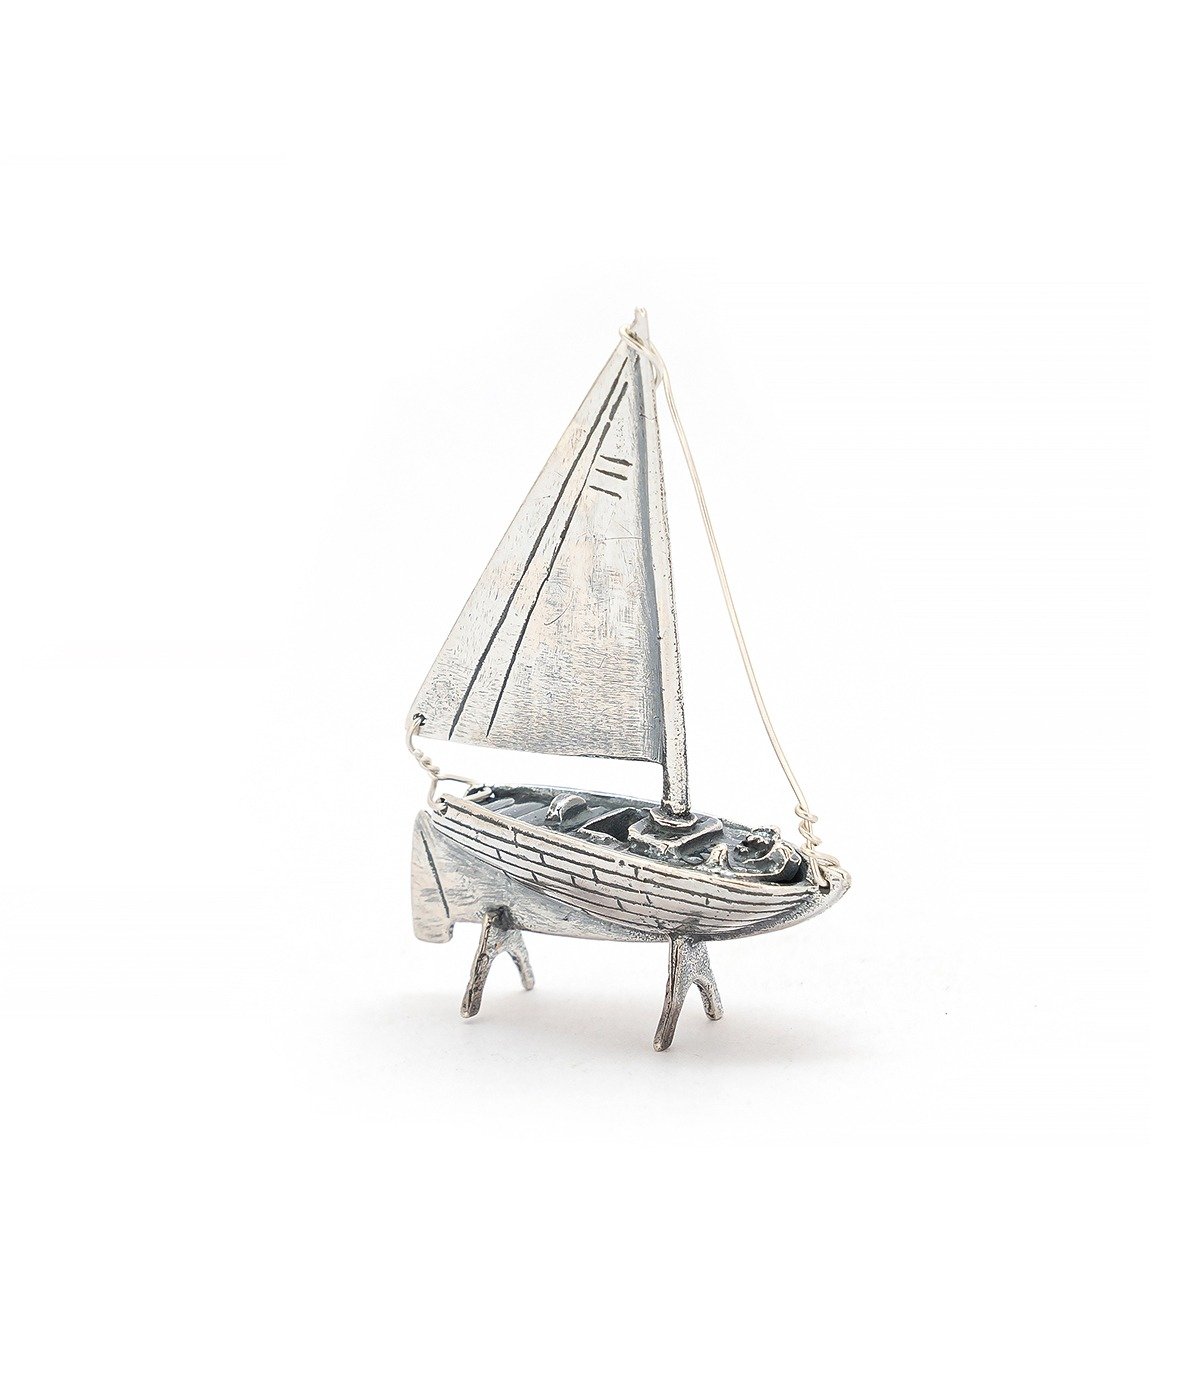 92.5 STERLING SILVER SAILING MINIATURE BOAT FOR GIFT